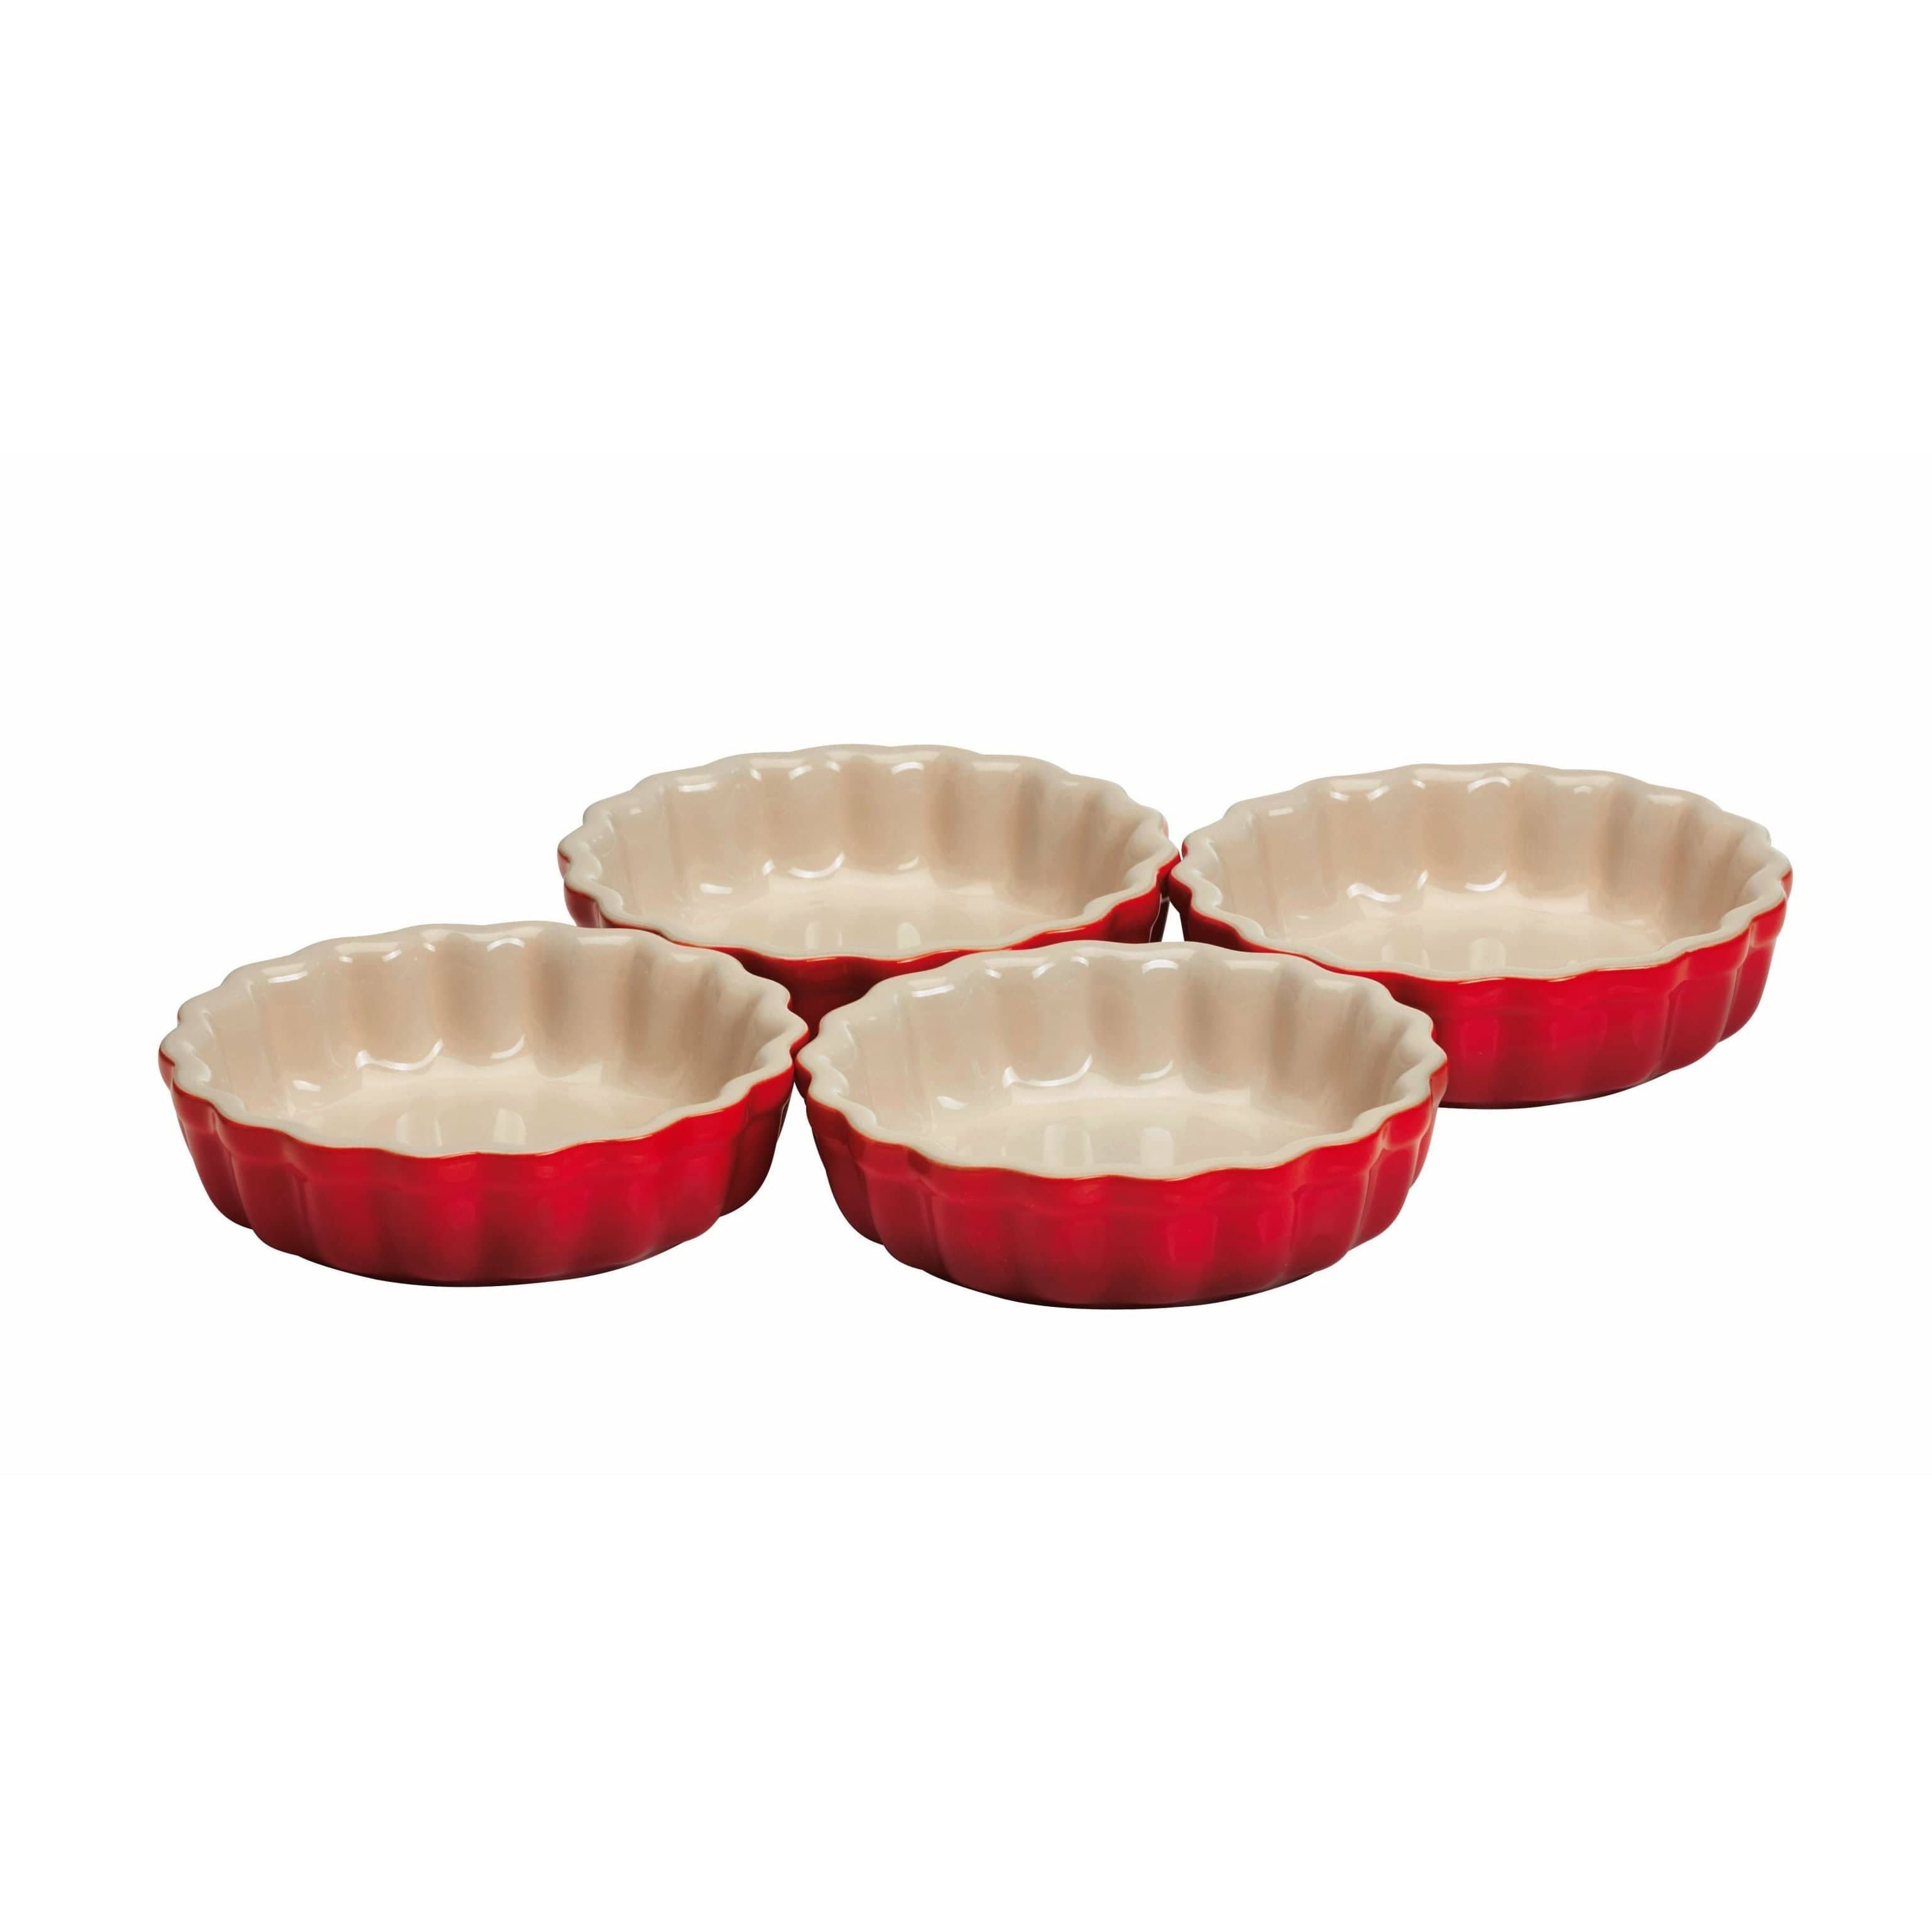 Le Creuset Heritage Set Of 4 Tart Cups 11 Cm, Cherry Red